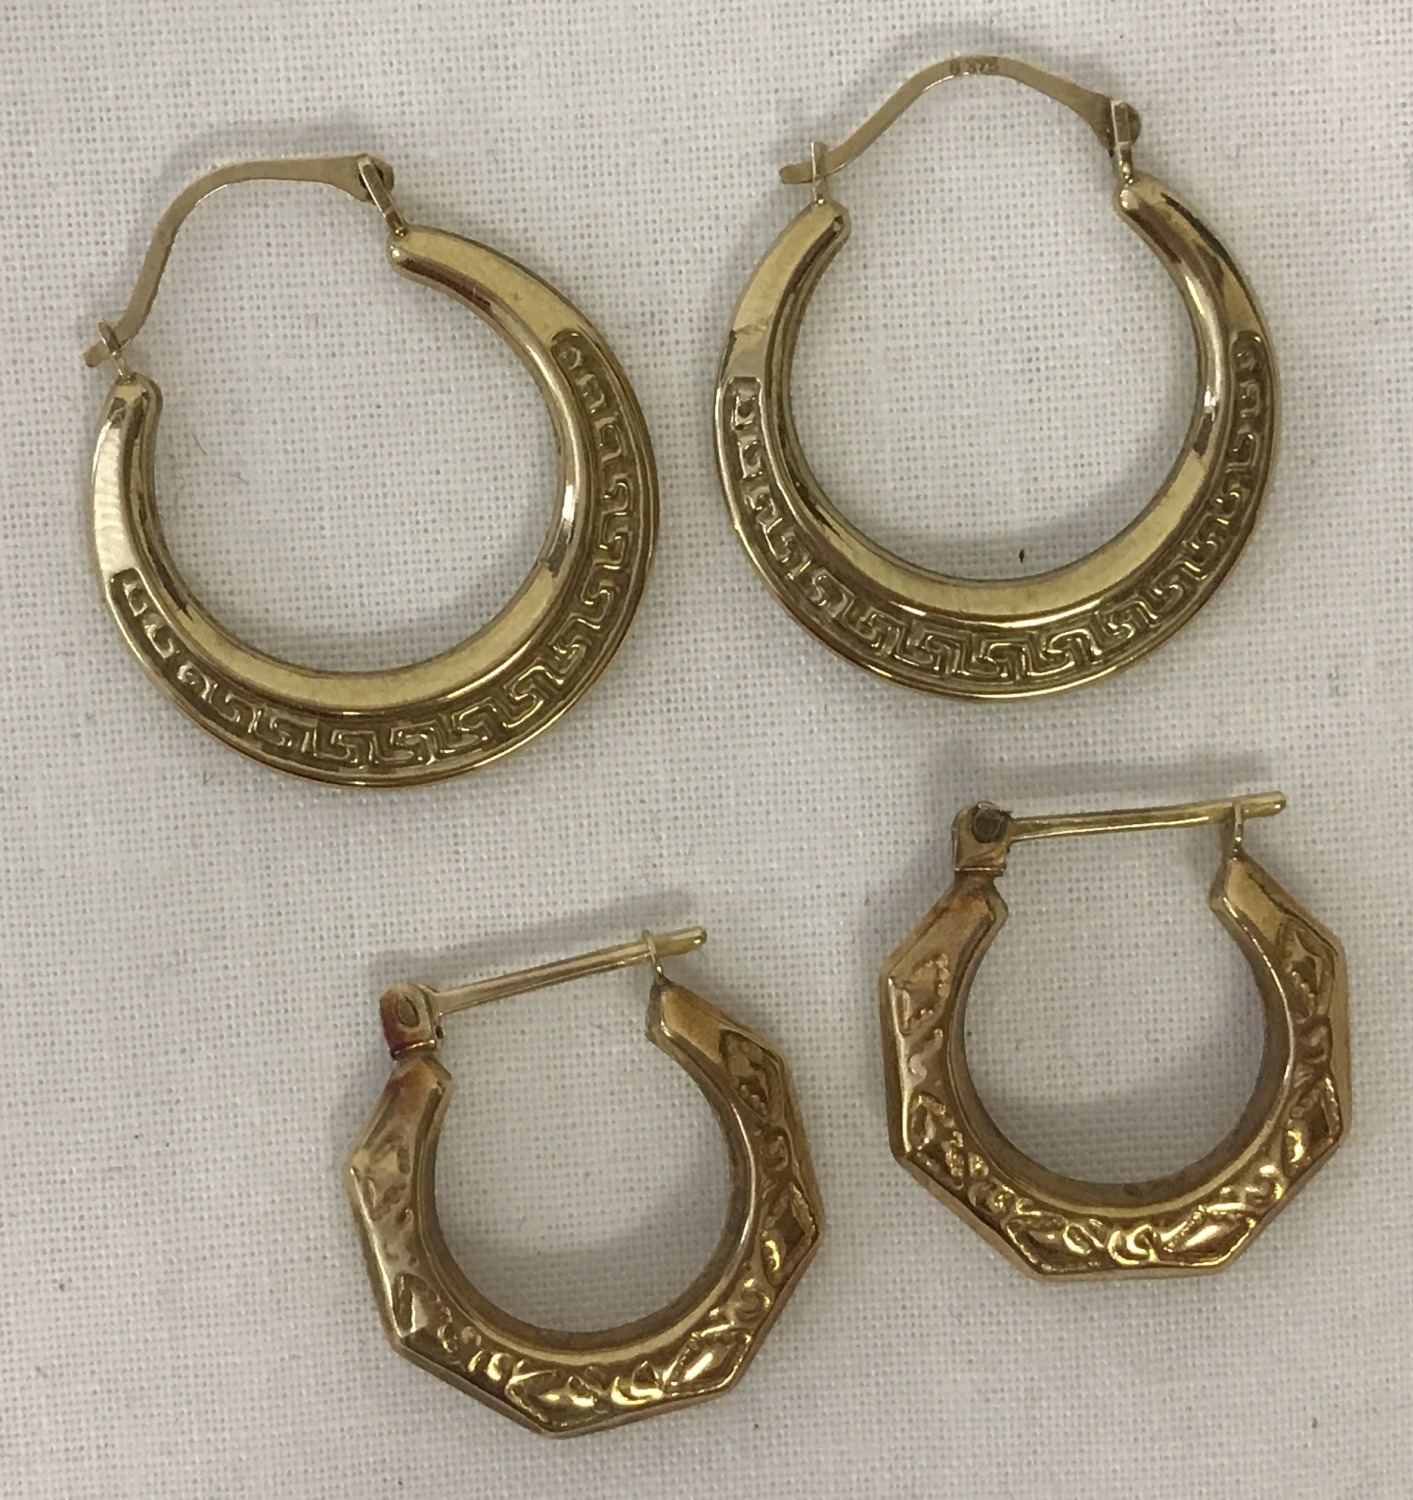 2 pairs of creole style 9ct gold earrings. One pair with Greek key decoration.